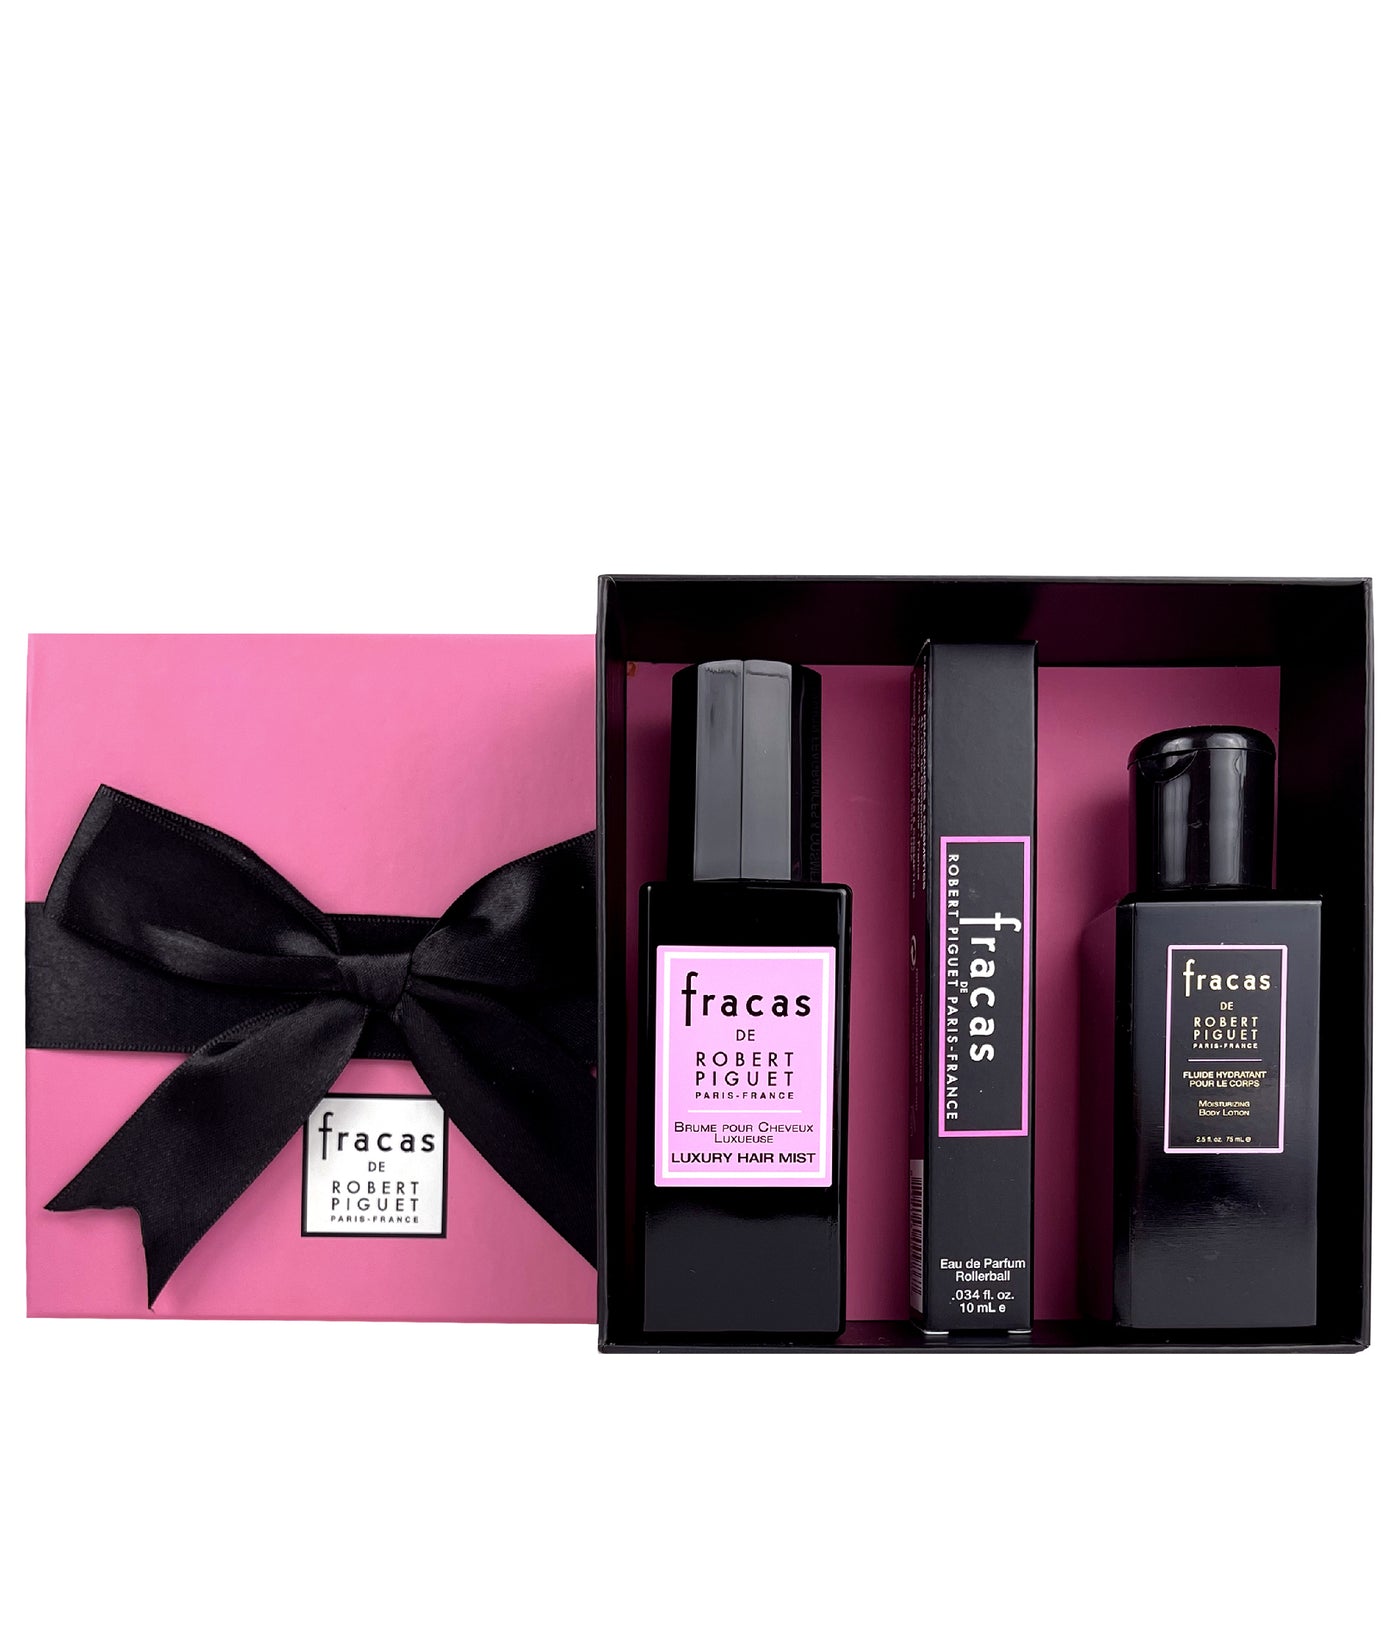 Limited Edition Fracas 75th Anniversary Gift Set